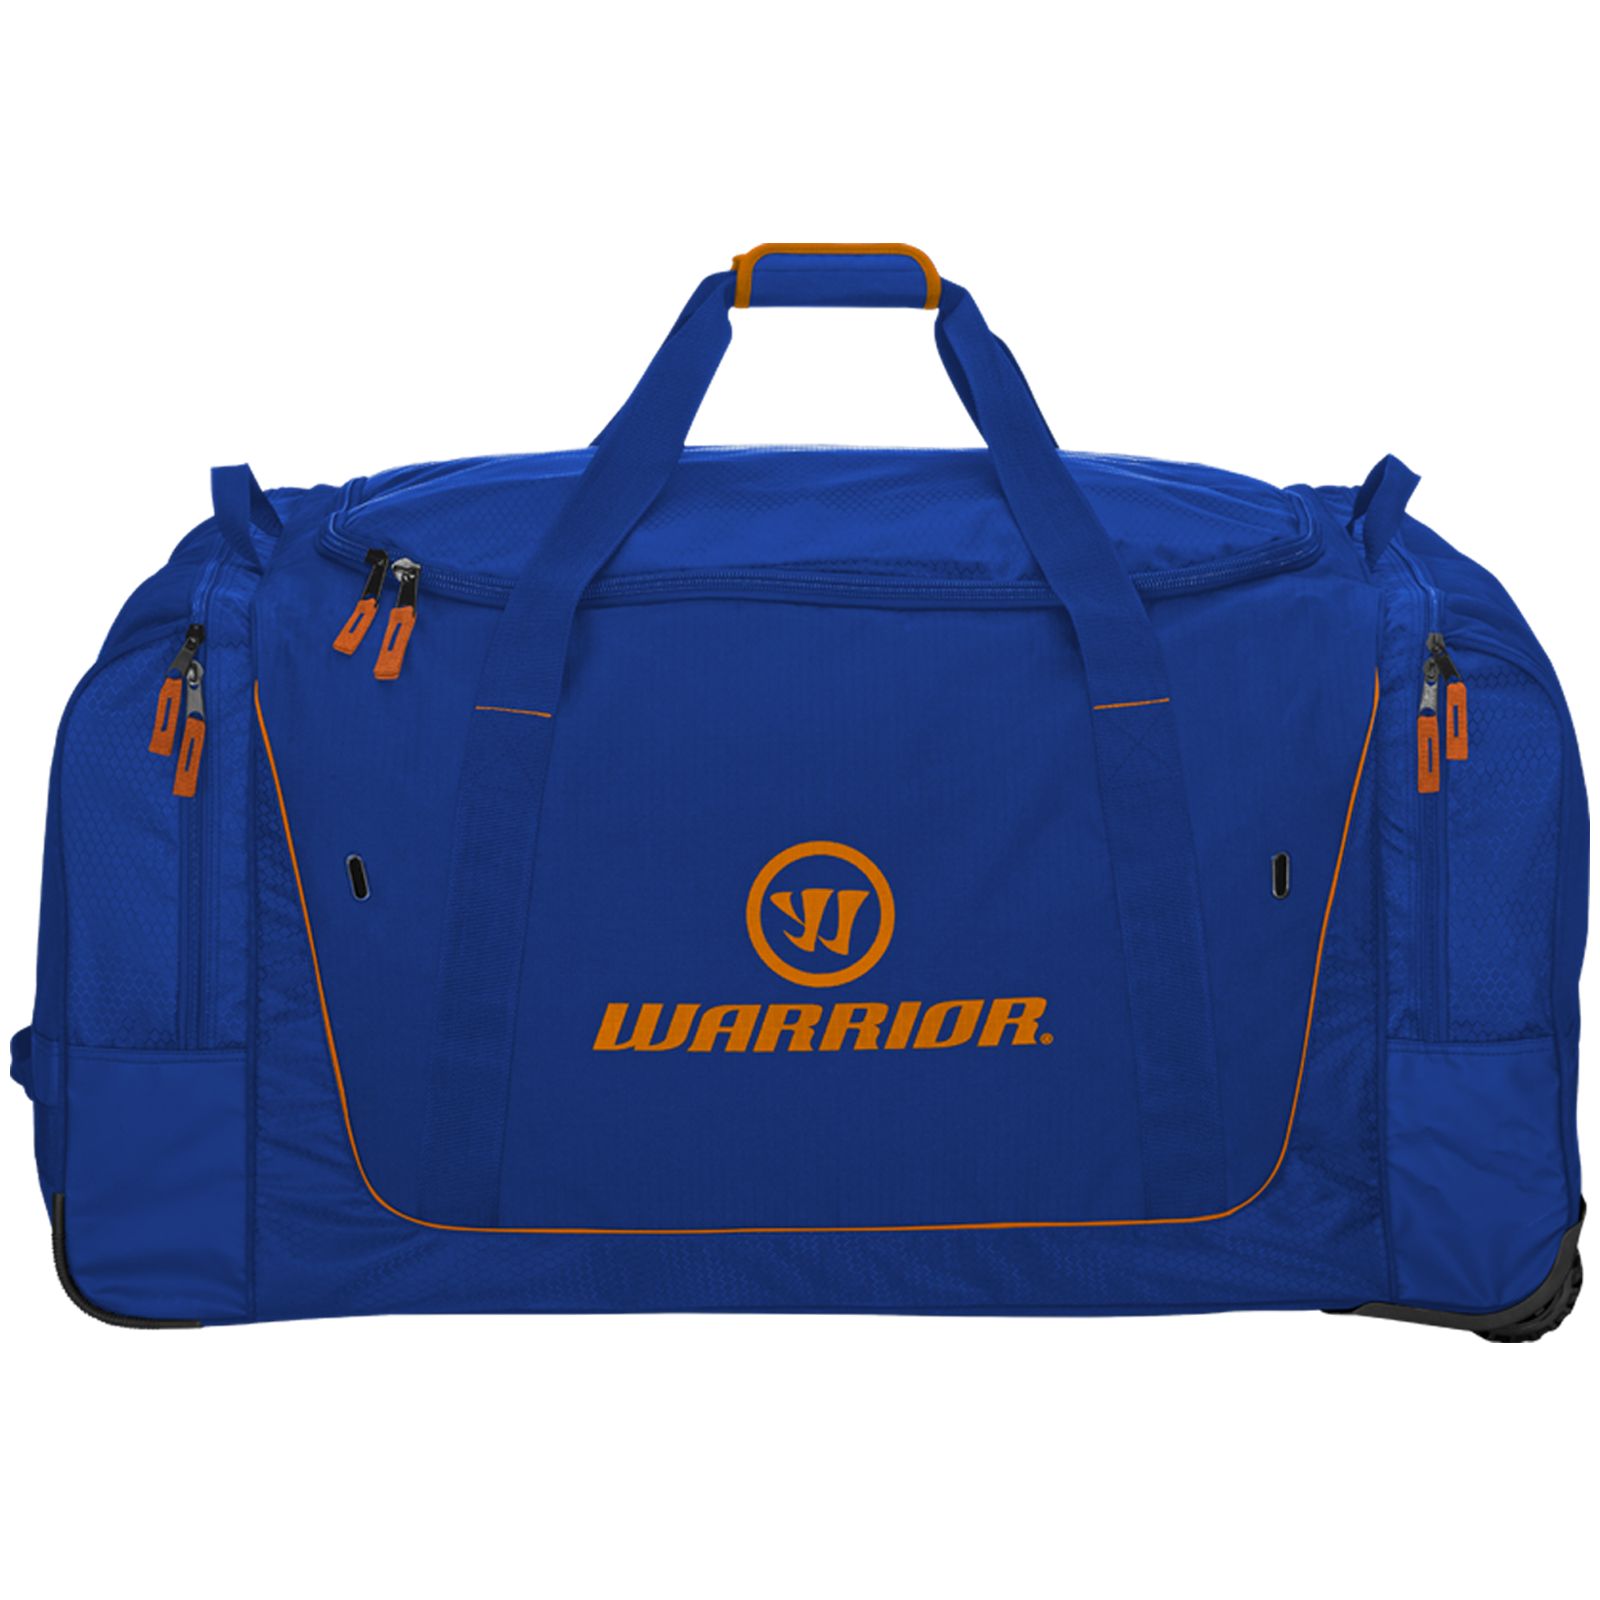 Q20 Cargo Carry Bag, Navy with Orange image number 0